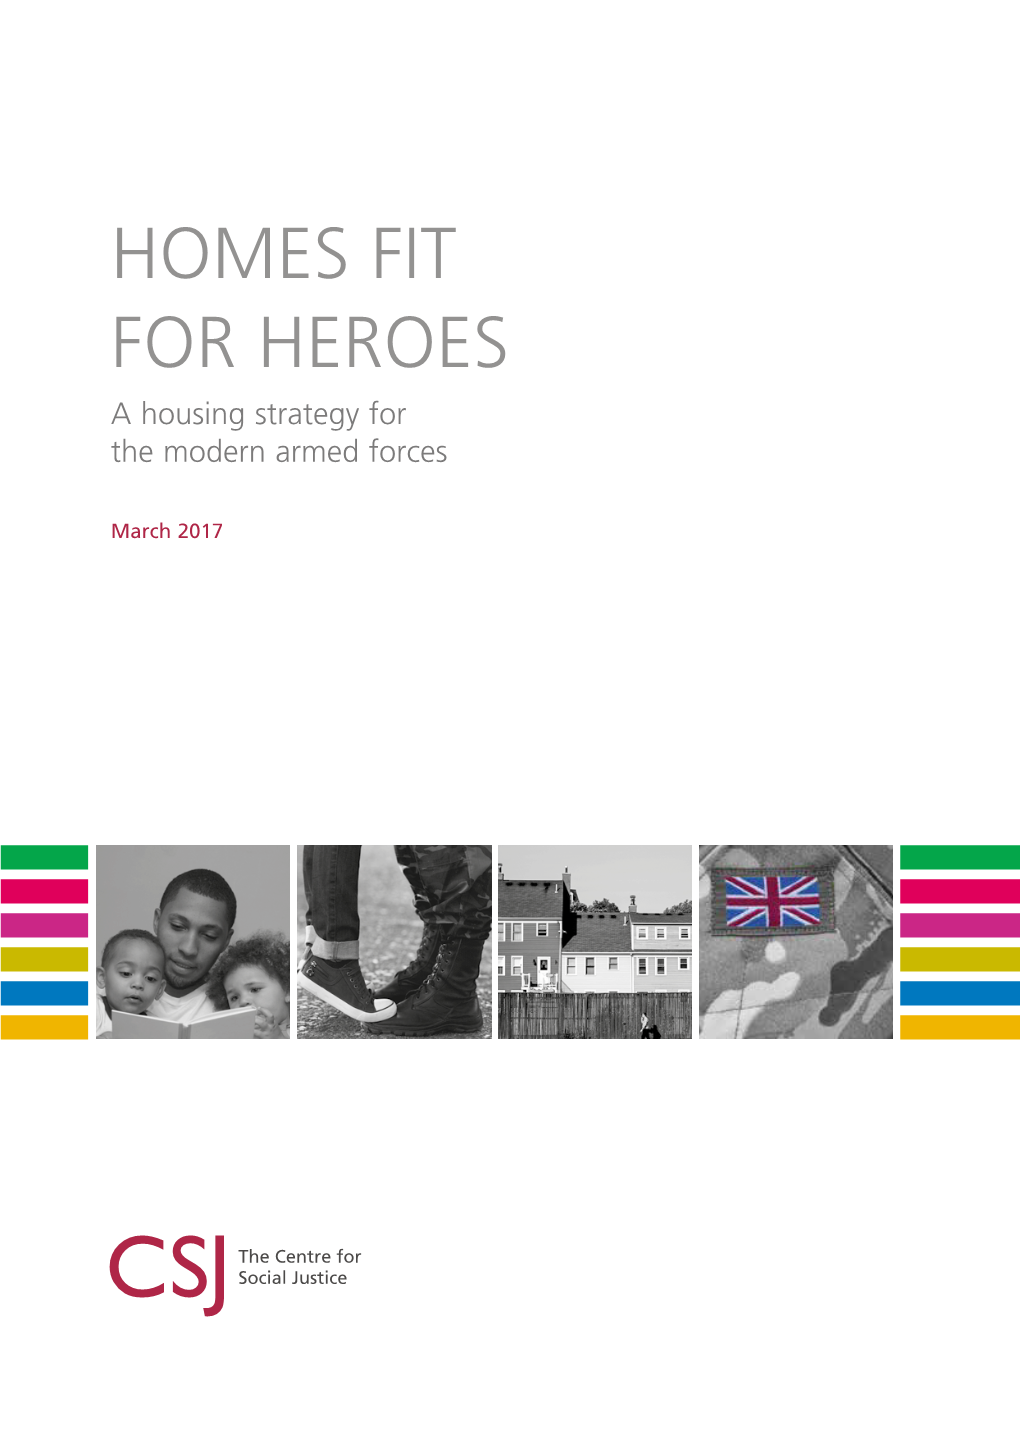 HOMES FIT for HEROES a Housing Strategy for the Modern Armed Forces